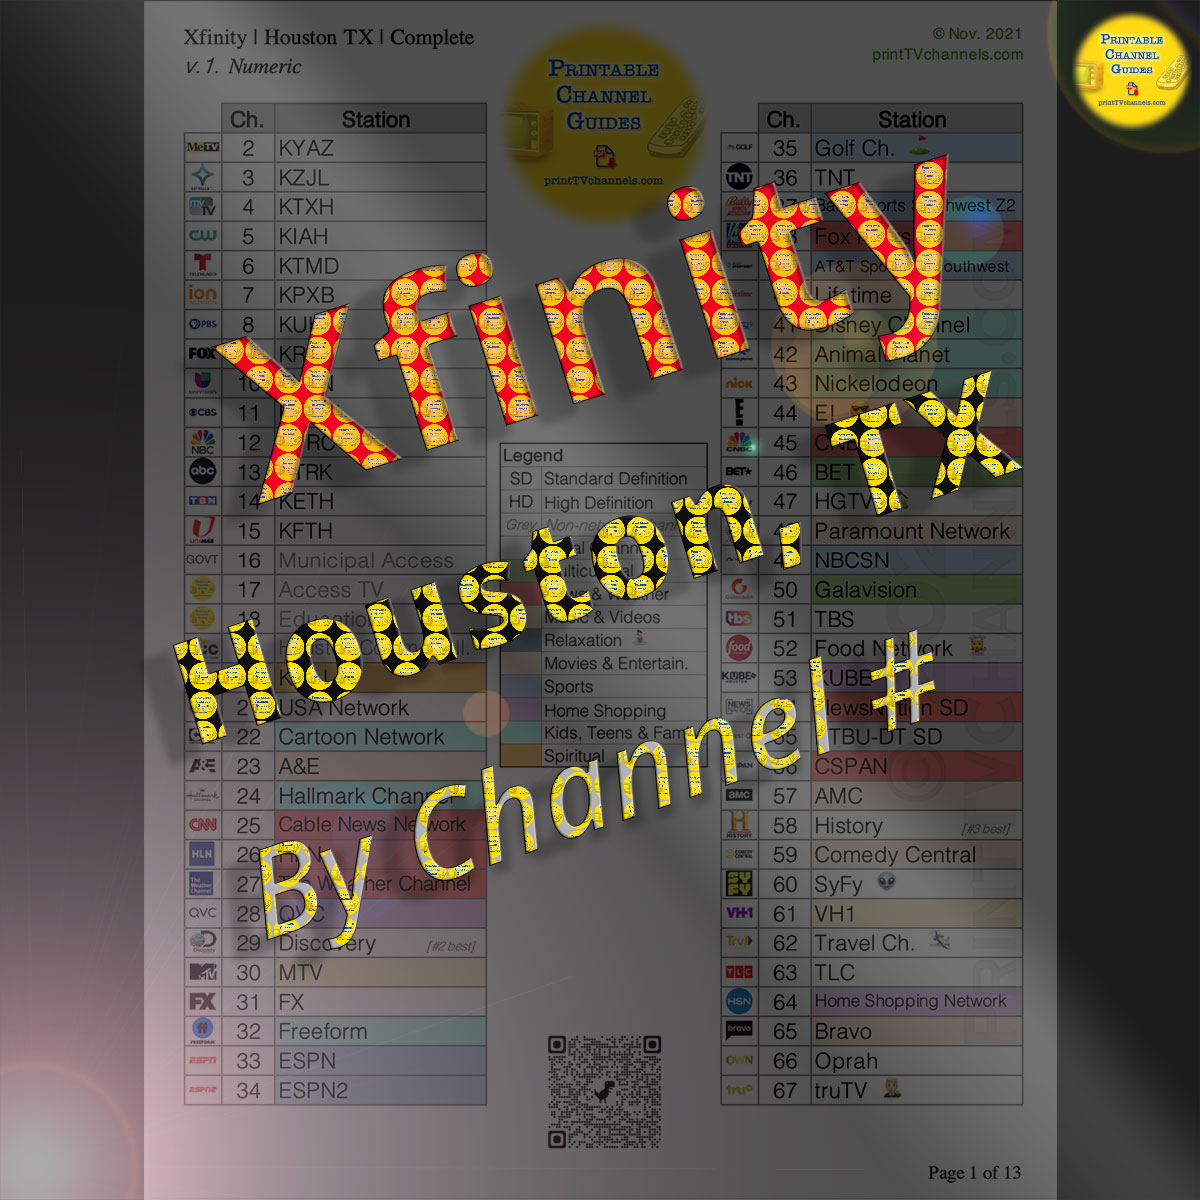 Preview Image: Xfinity Channel Lineup for Houston, TX | Organized by Channel Number — A FREE printable PDF channel guide listing all available TV stations for Comcast Xfinity customers in Houston, Texas. Includes all stations available with the various plans (Limited Basic/Choice TV Plus, Popular, Ultimate) as well as Spanish and international channels. Color coded by genre to make it easier finding channels. PDF is search friendly too. Numerous duplicate and even triplicate stations. If there is no "HD" after the channel name, this means the station is SD. v.1. Created November 2021.